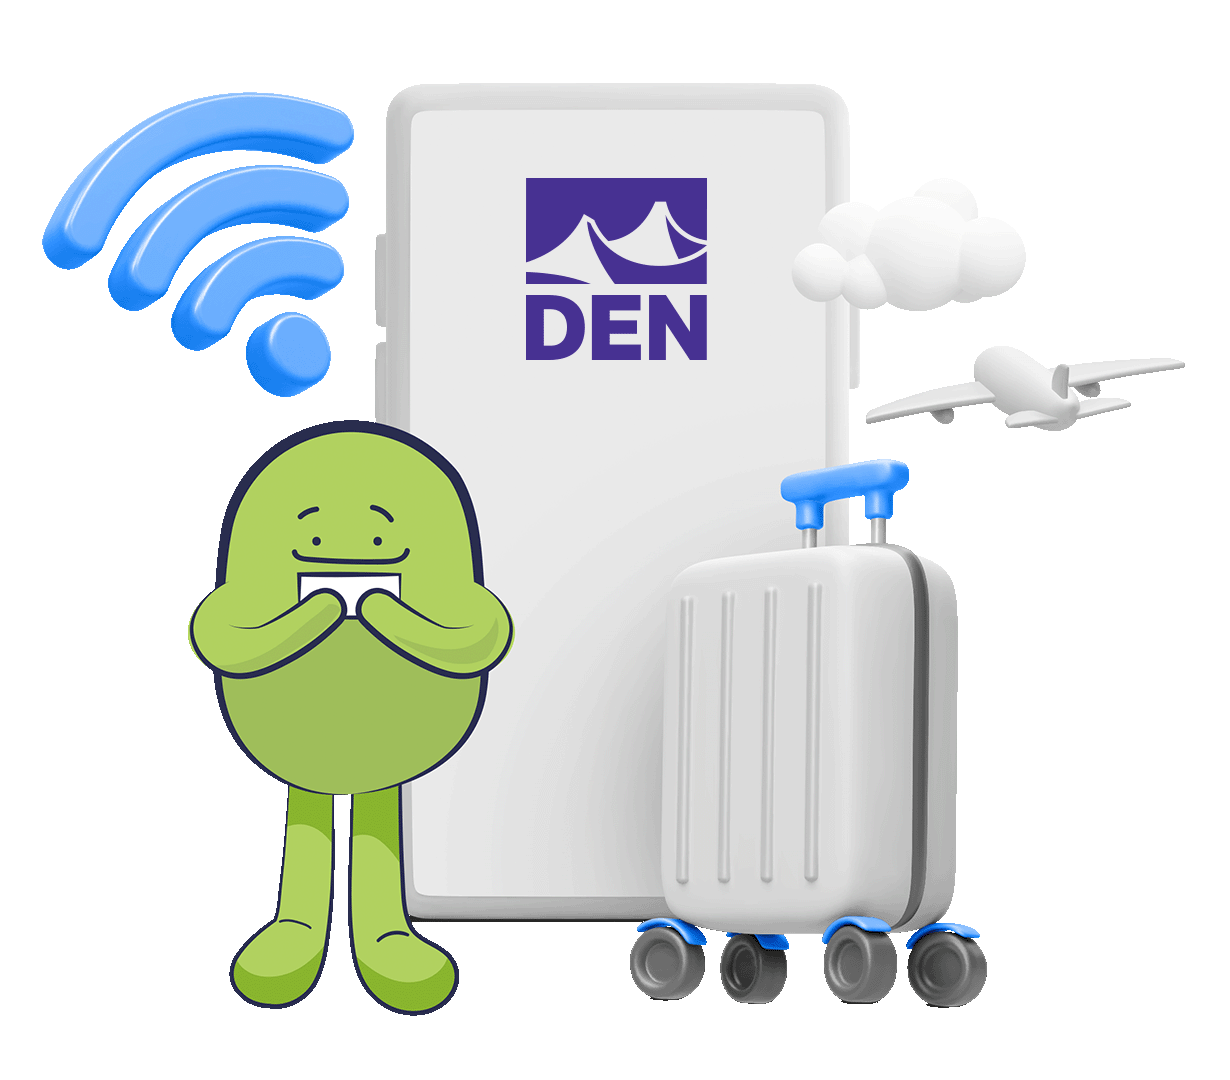 How to connect to Denver Airport WiFi